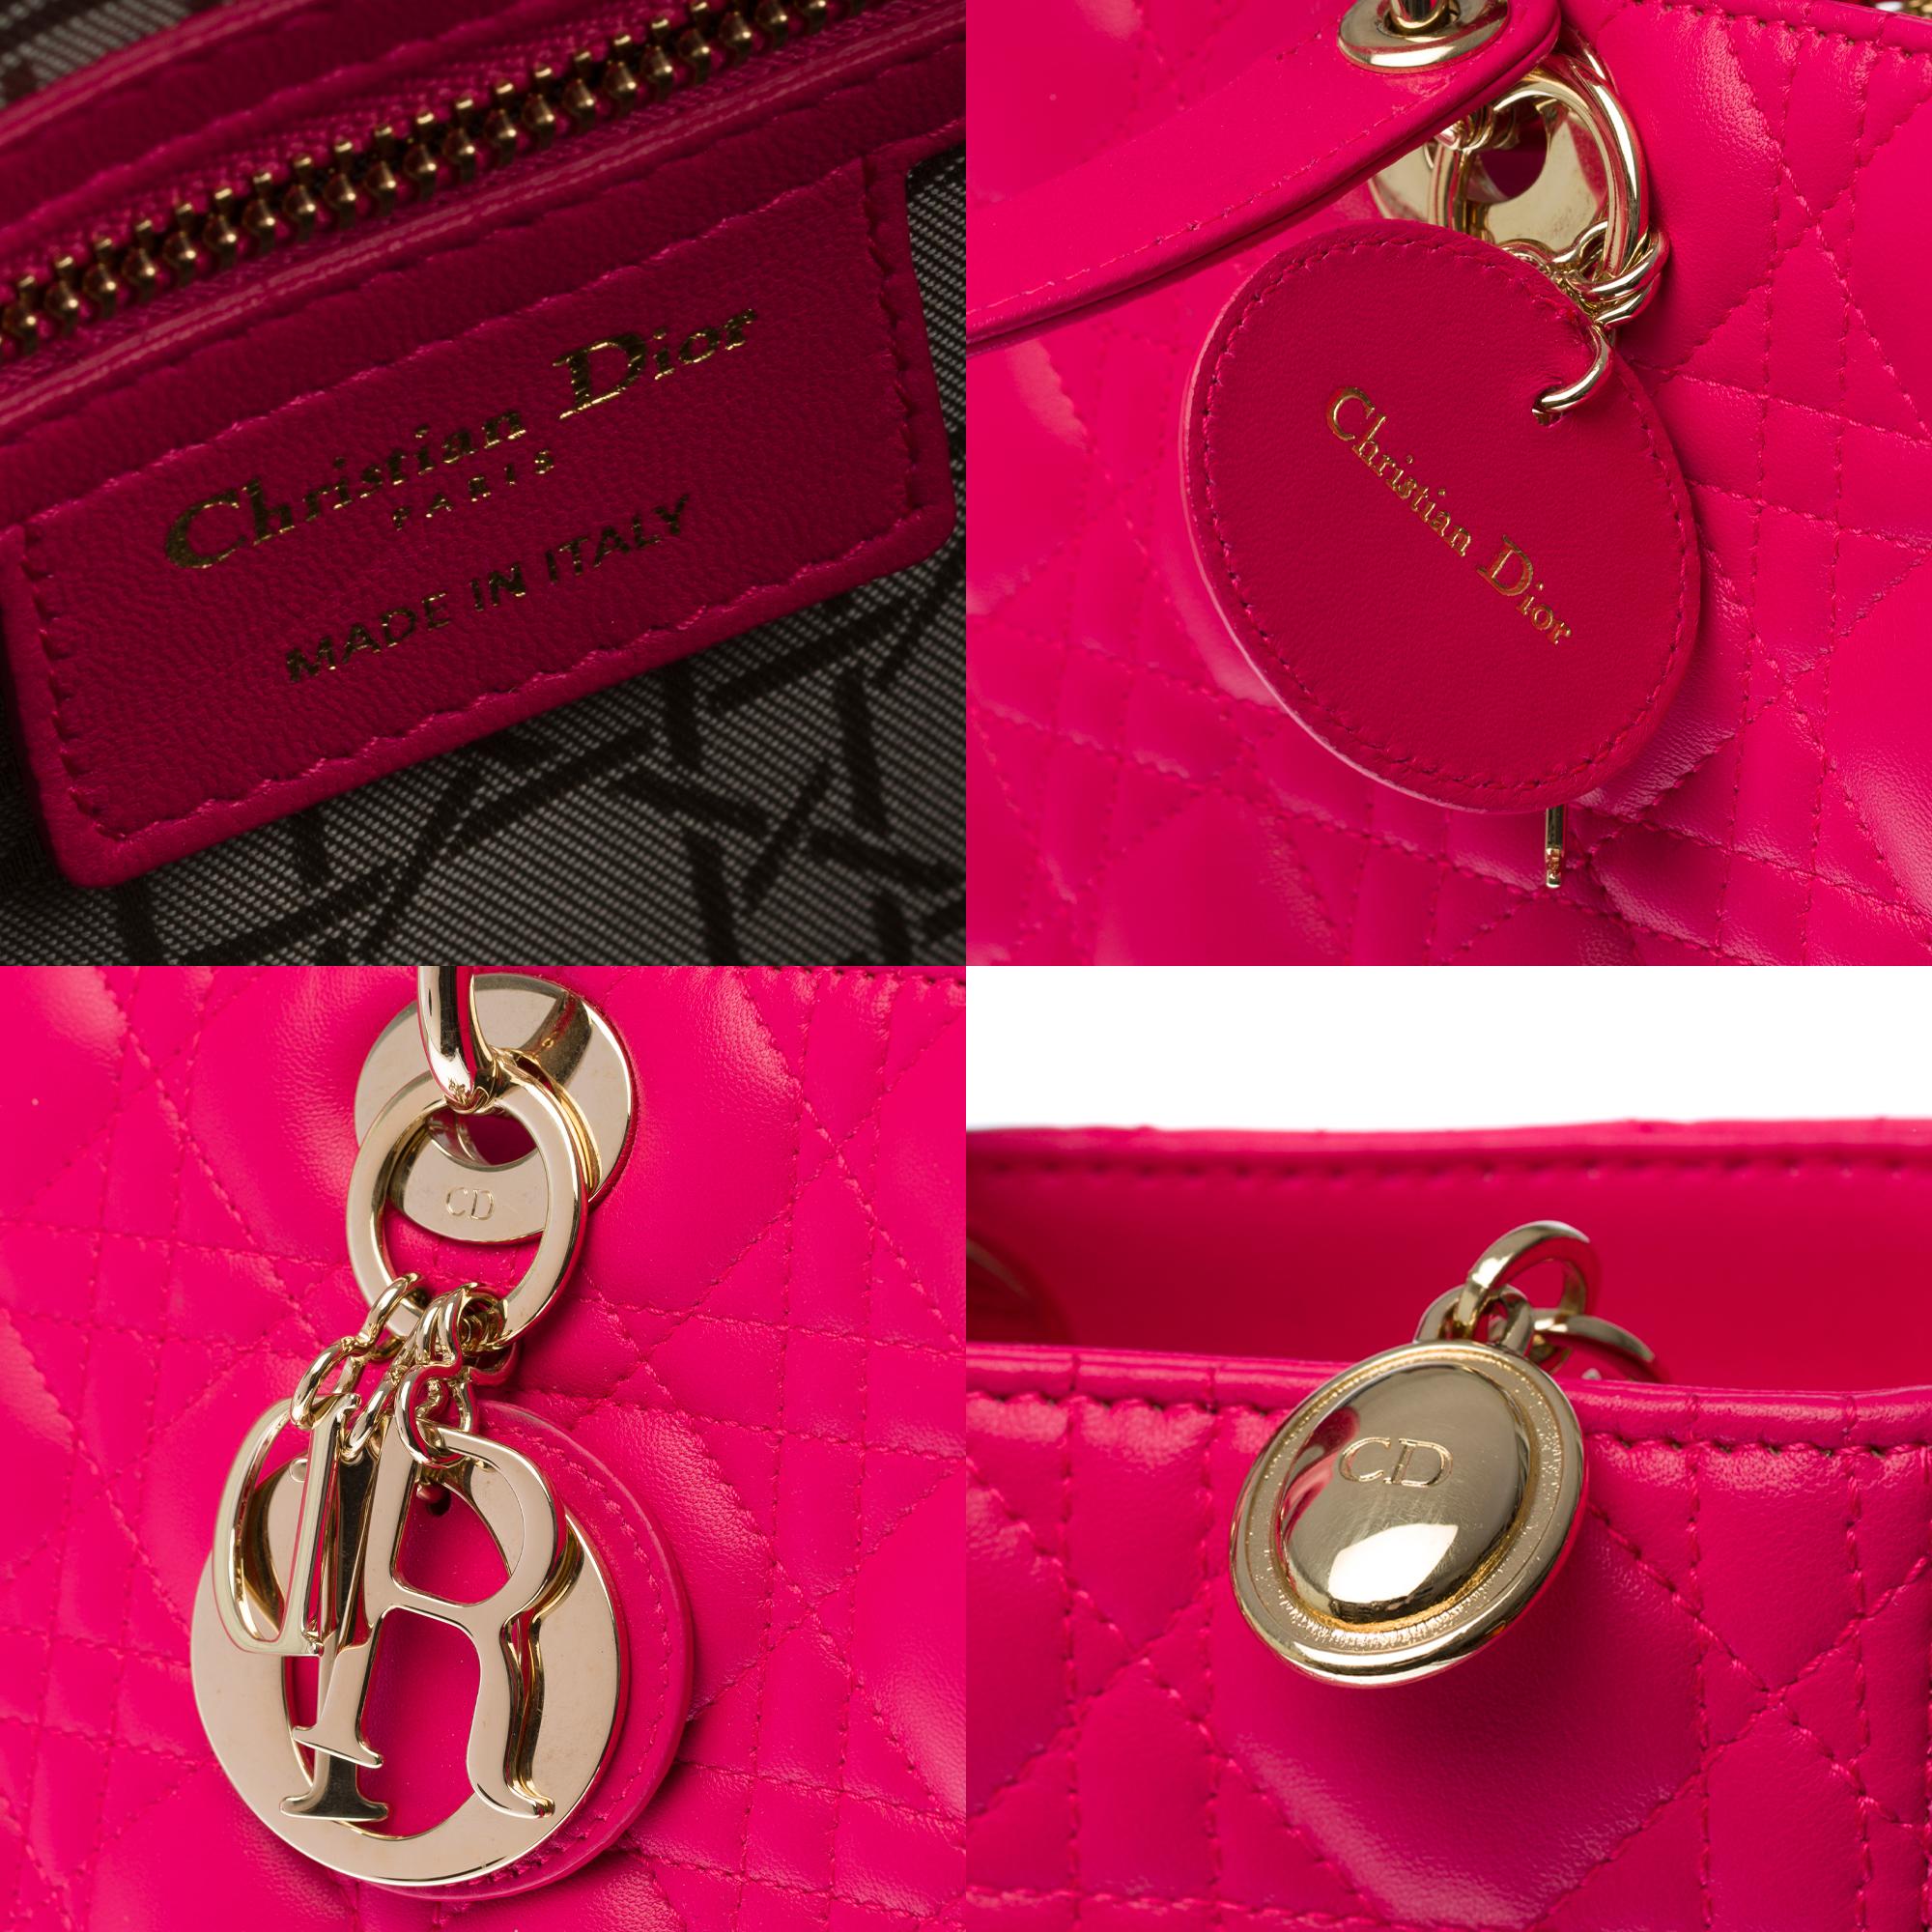 Women's Lady Dior GM ( large size) shoulder bag with strap in Pink cannage leather, SHW